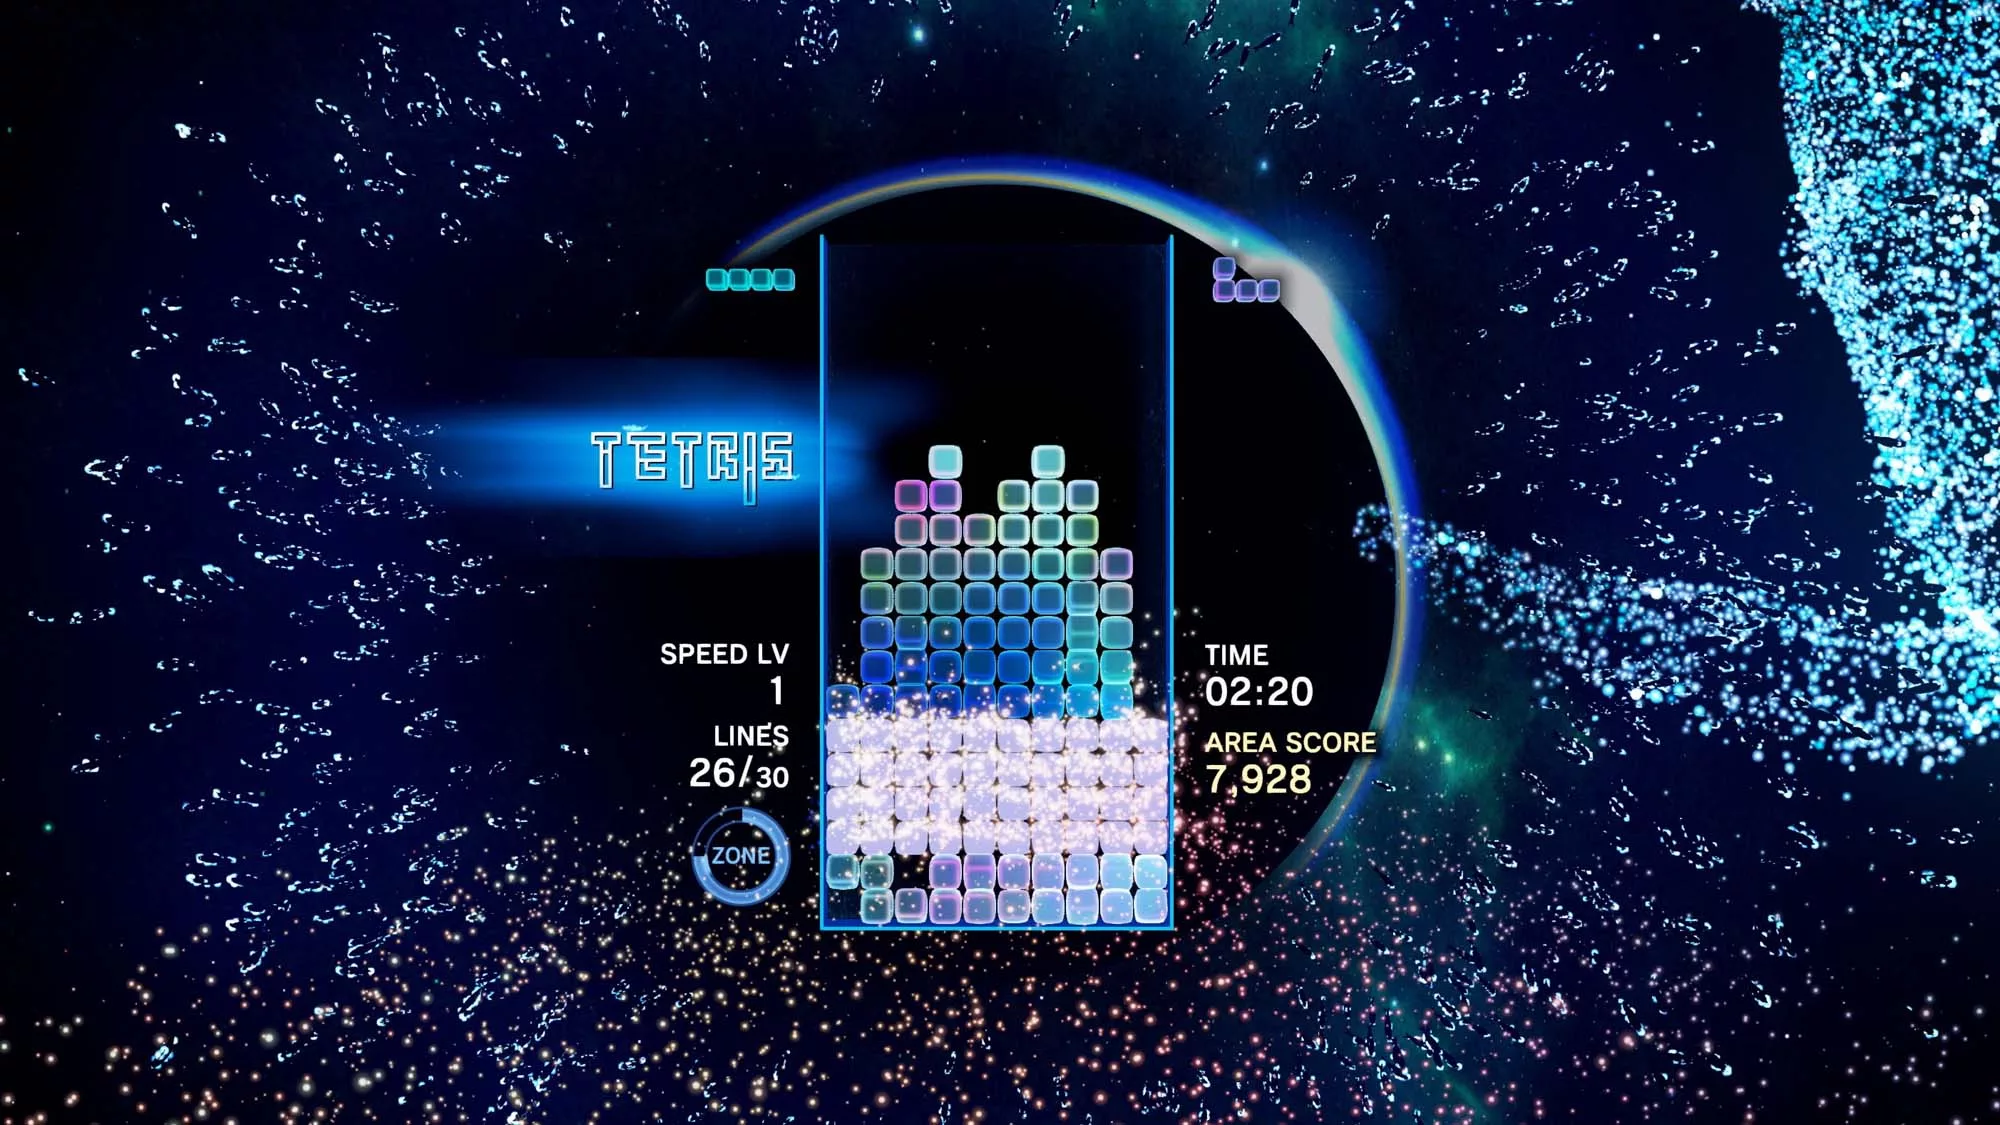 Screenshot of a Tetris game on a starry background.